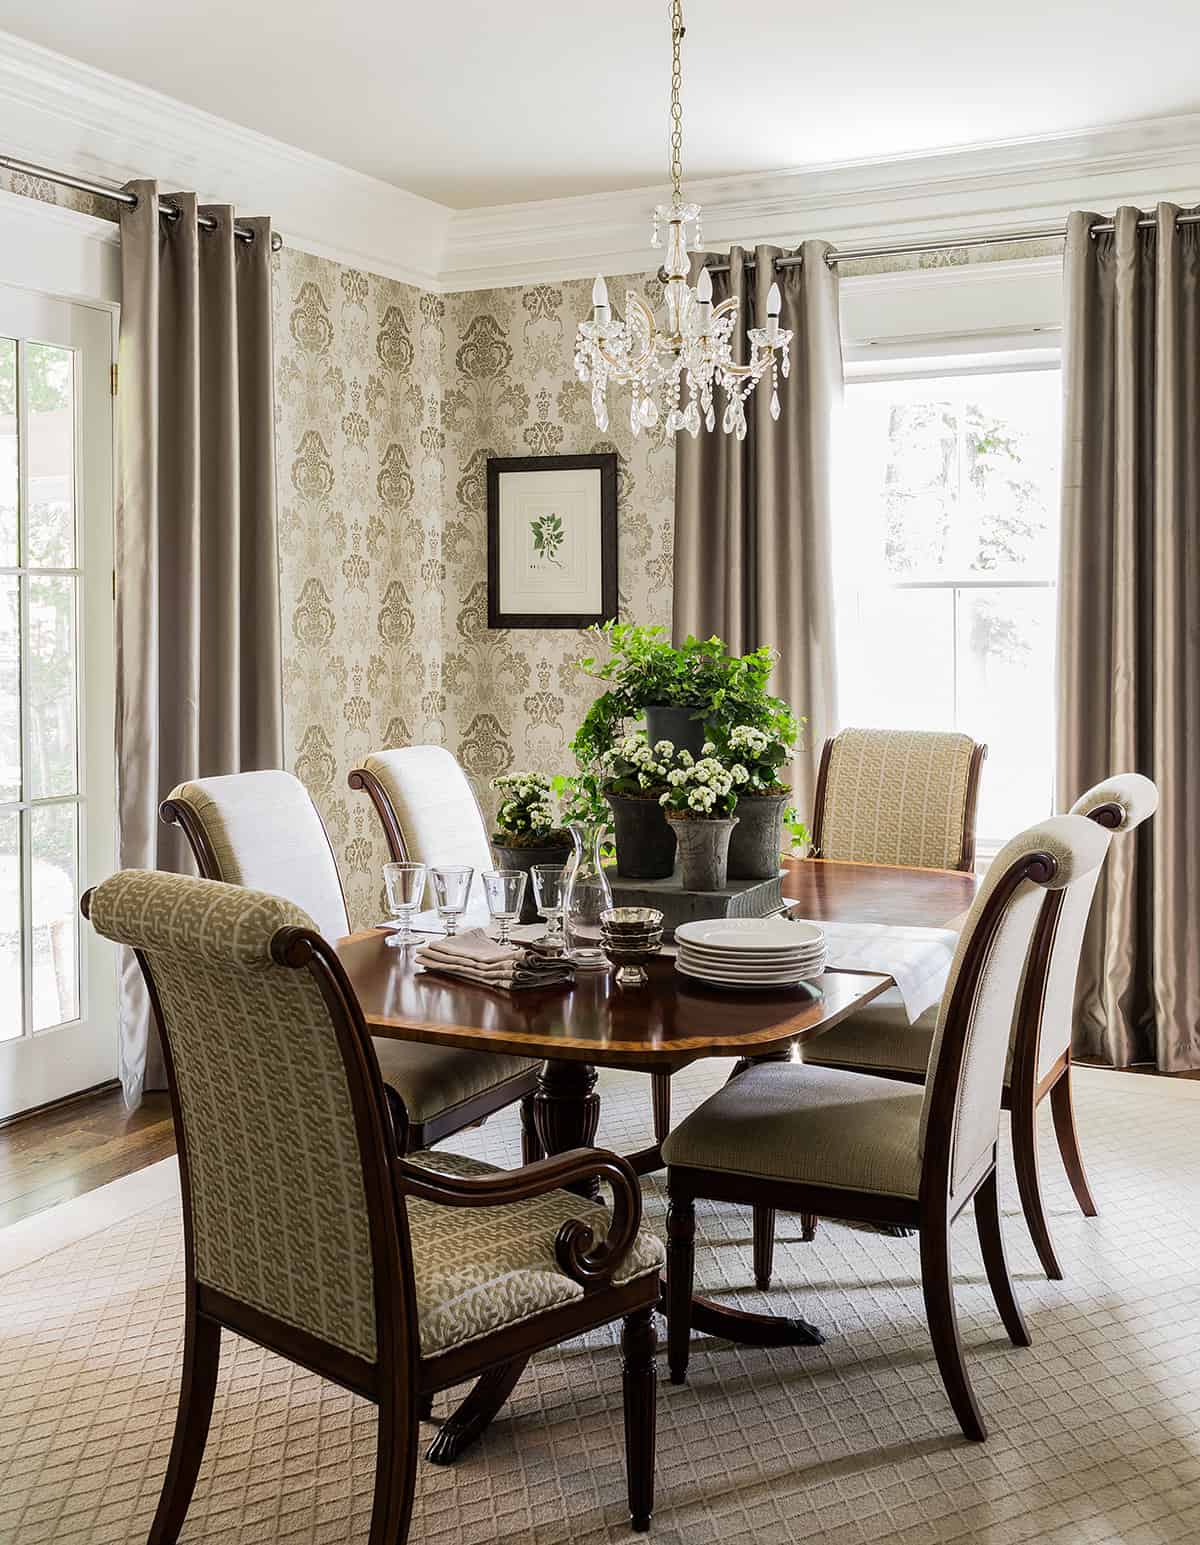 Dining Room-multilayered crown moldings